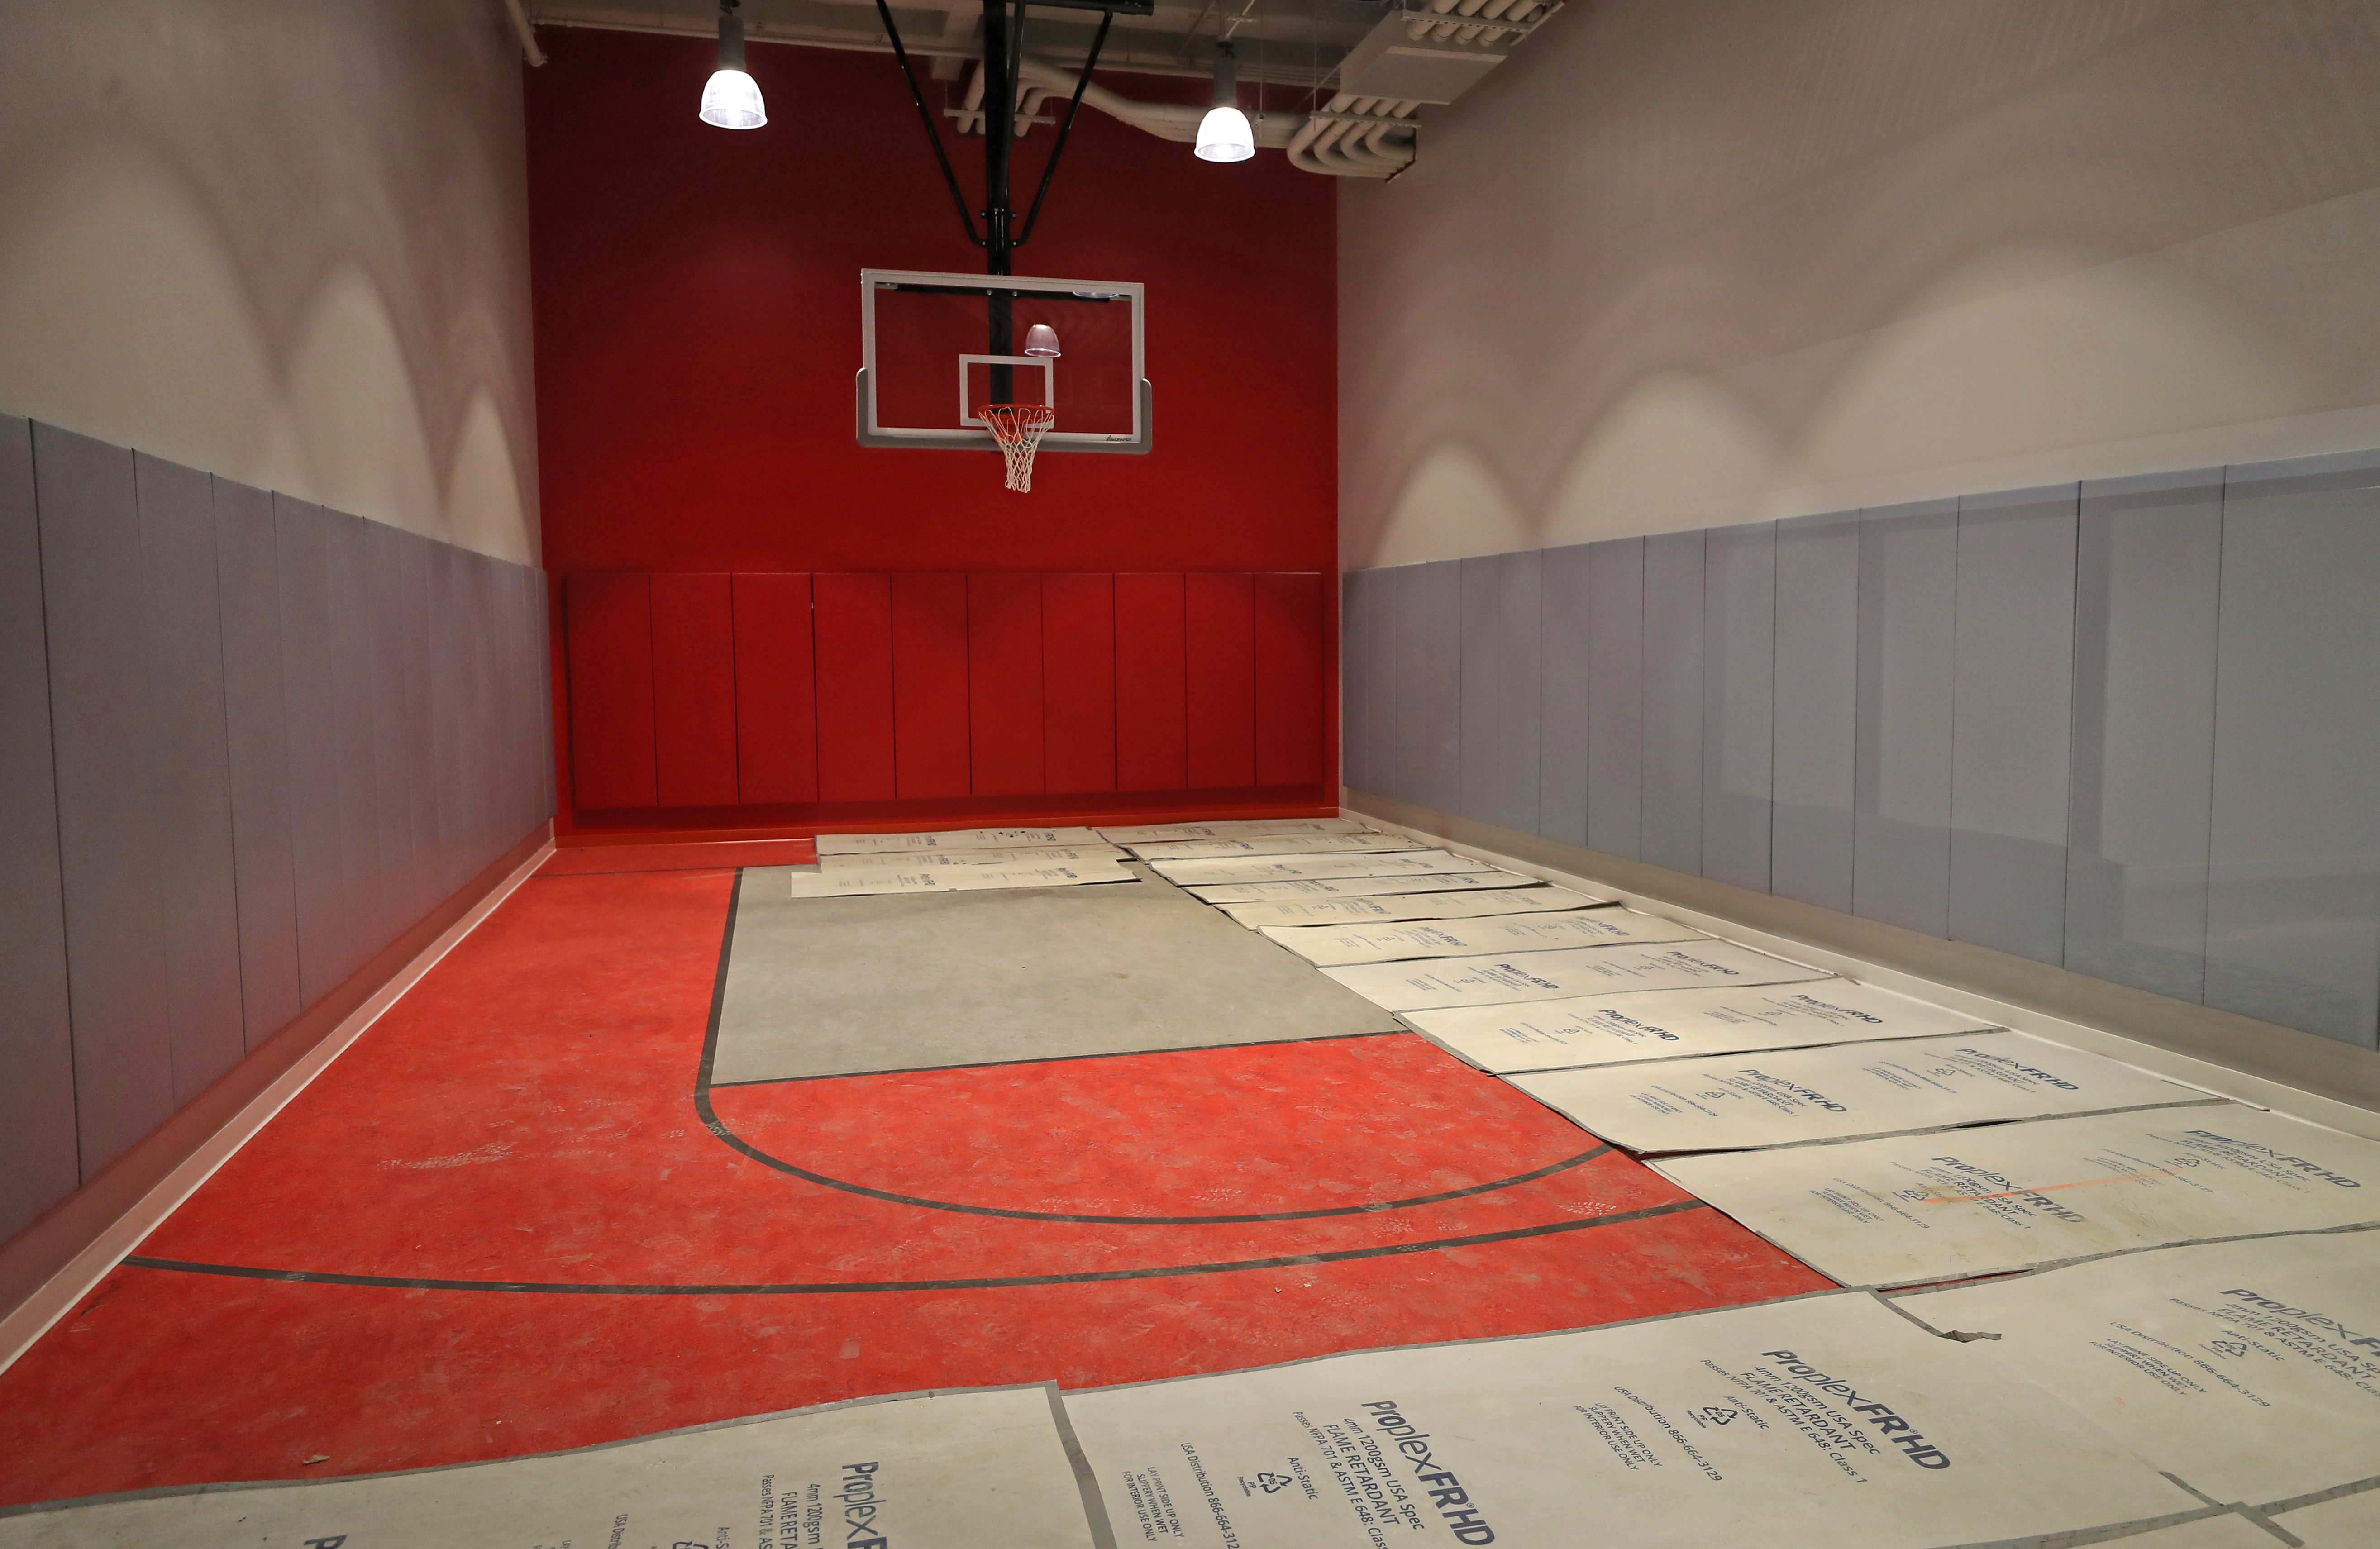 A new basketball court occupies space that was once was the rear of press room.